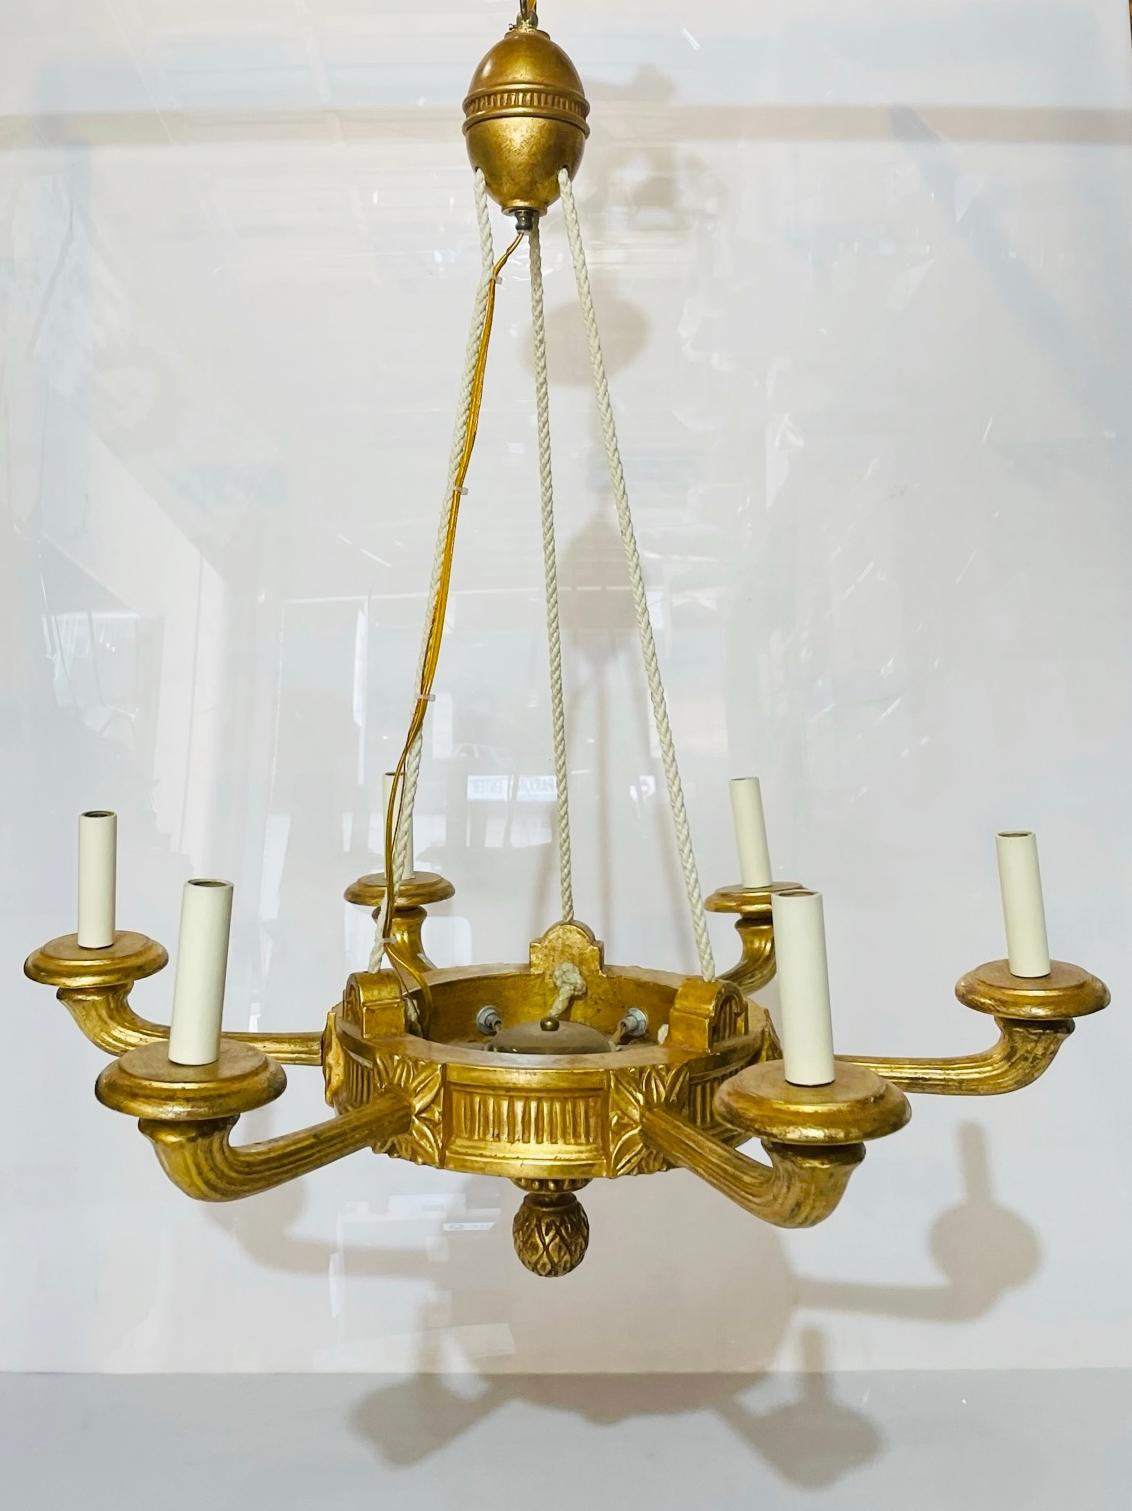 Based on an original Louis XVI antique we discovered in France, this chandelier has a neo-classical aesthetic. Decorative details, like the rope effect on the arms and patterned finial, are intricately hand-carved in giltwood.

Craftsmen